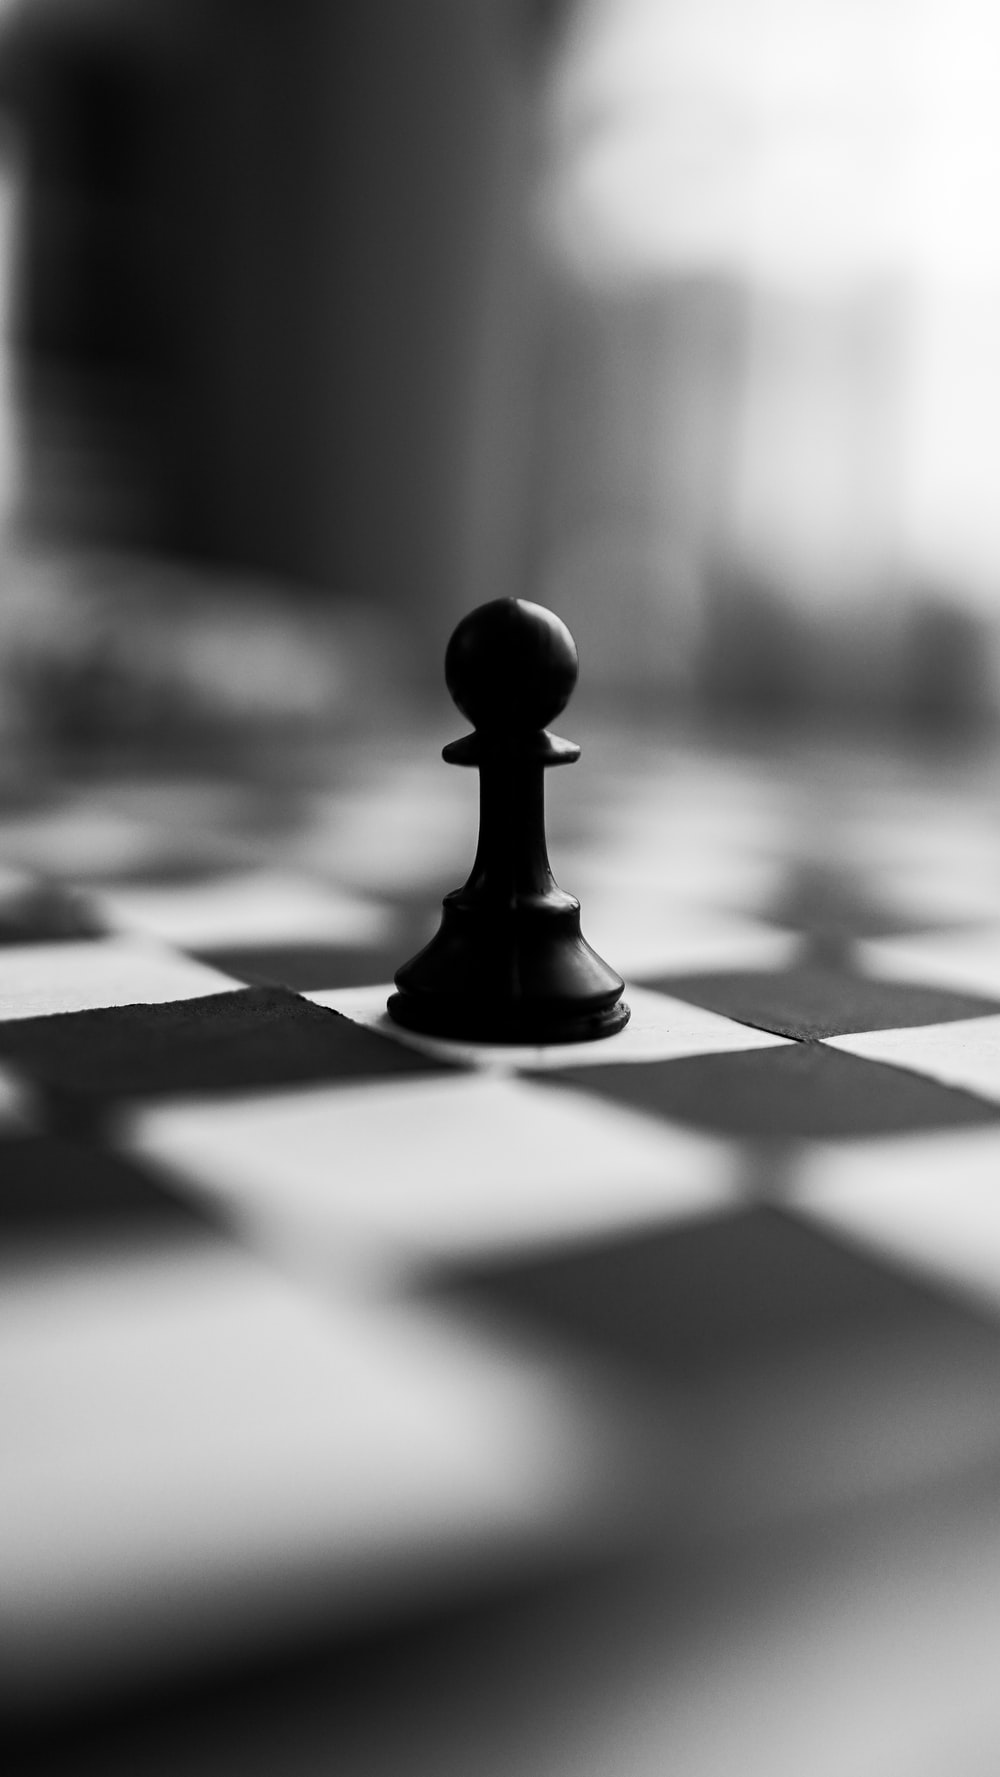 Checkmate Picture. Download Free Image